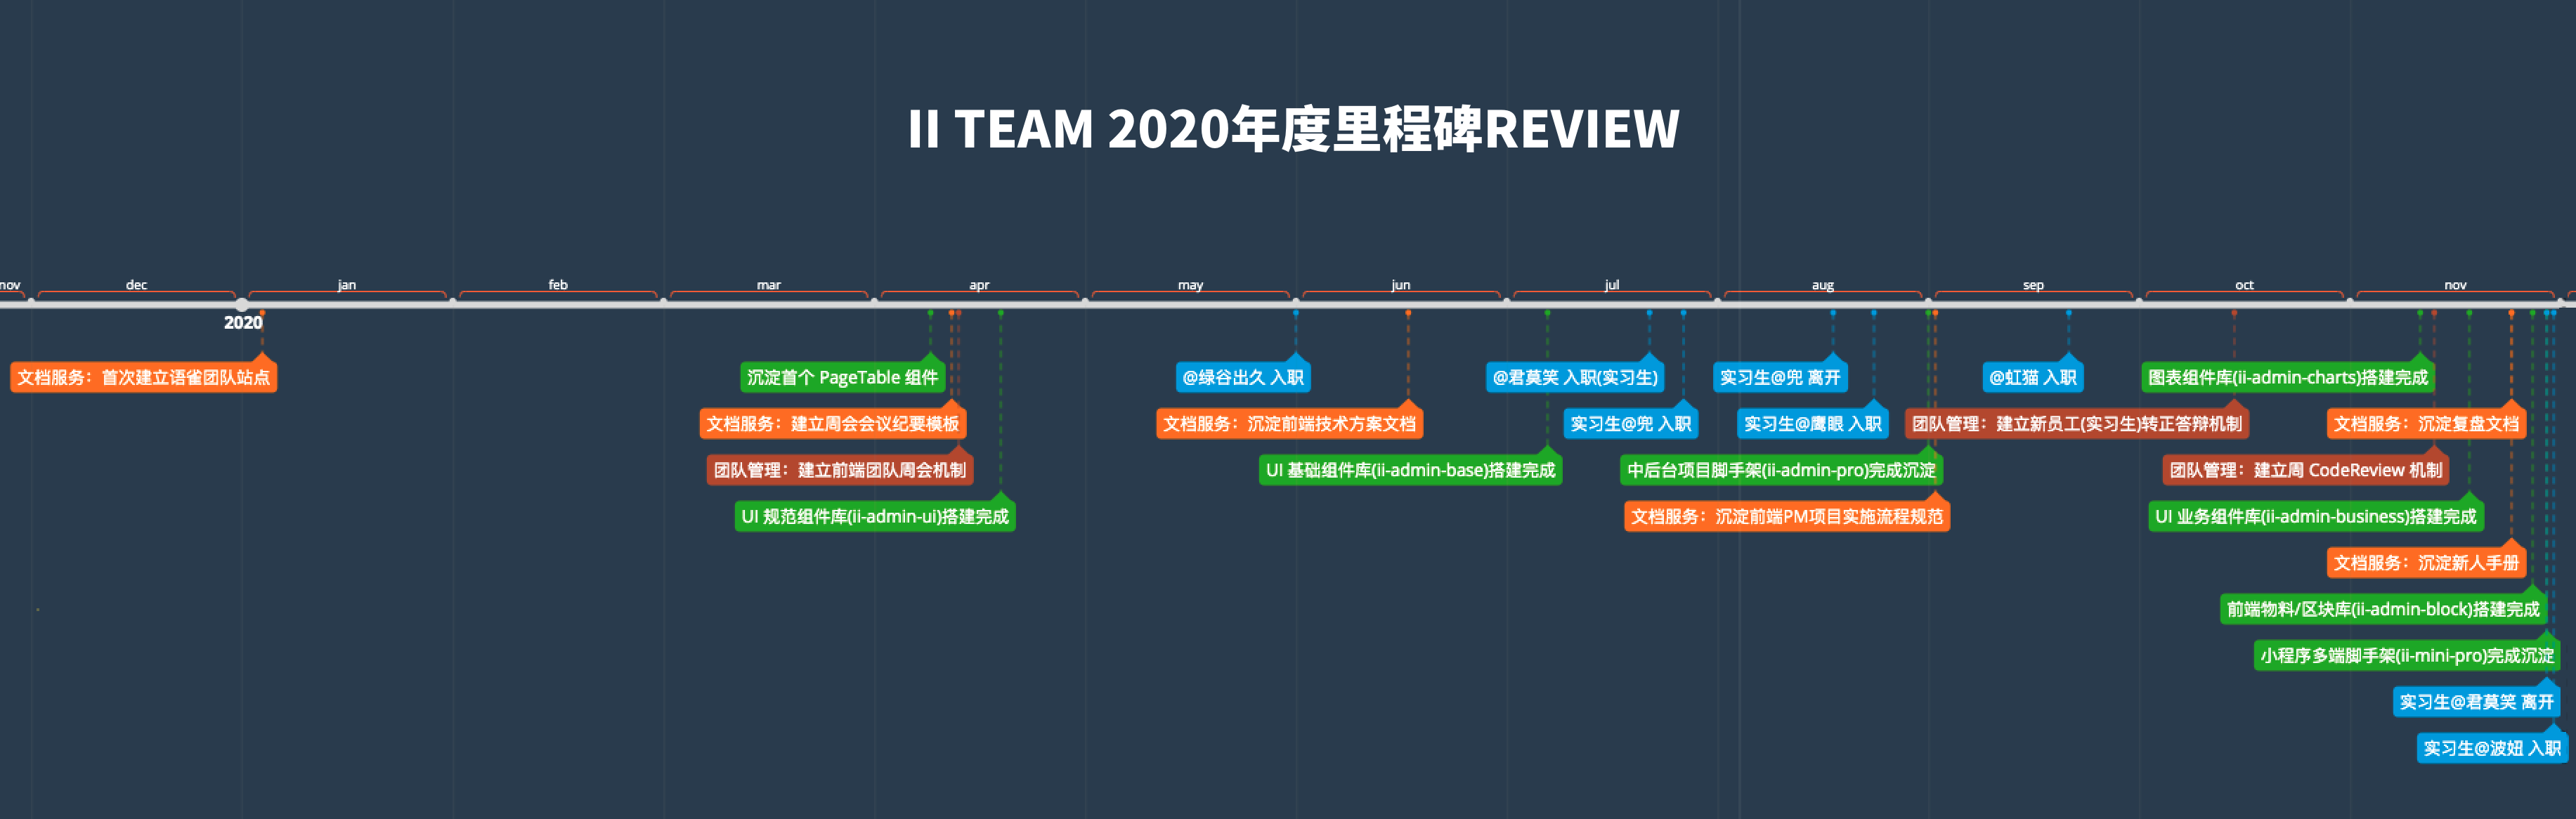 II TEAM 2020年度里程碑REVIEW.png